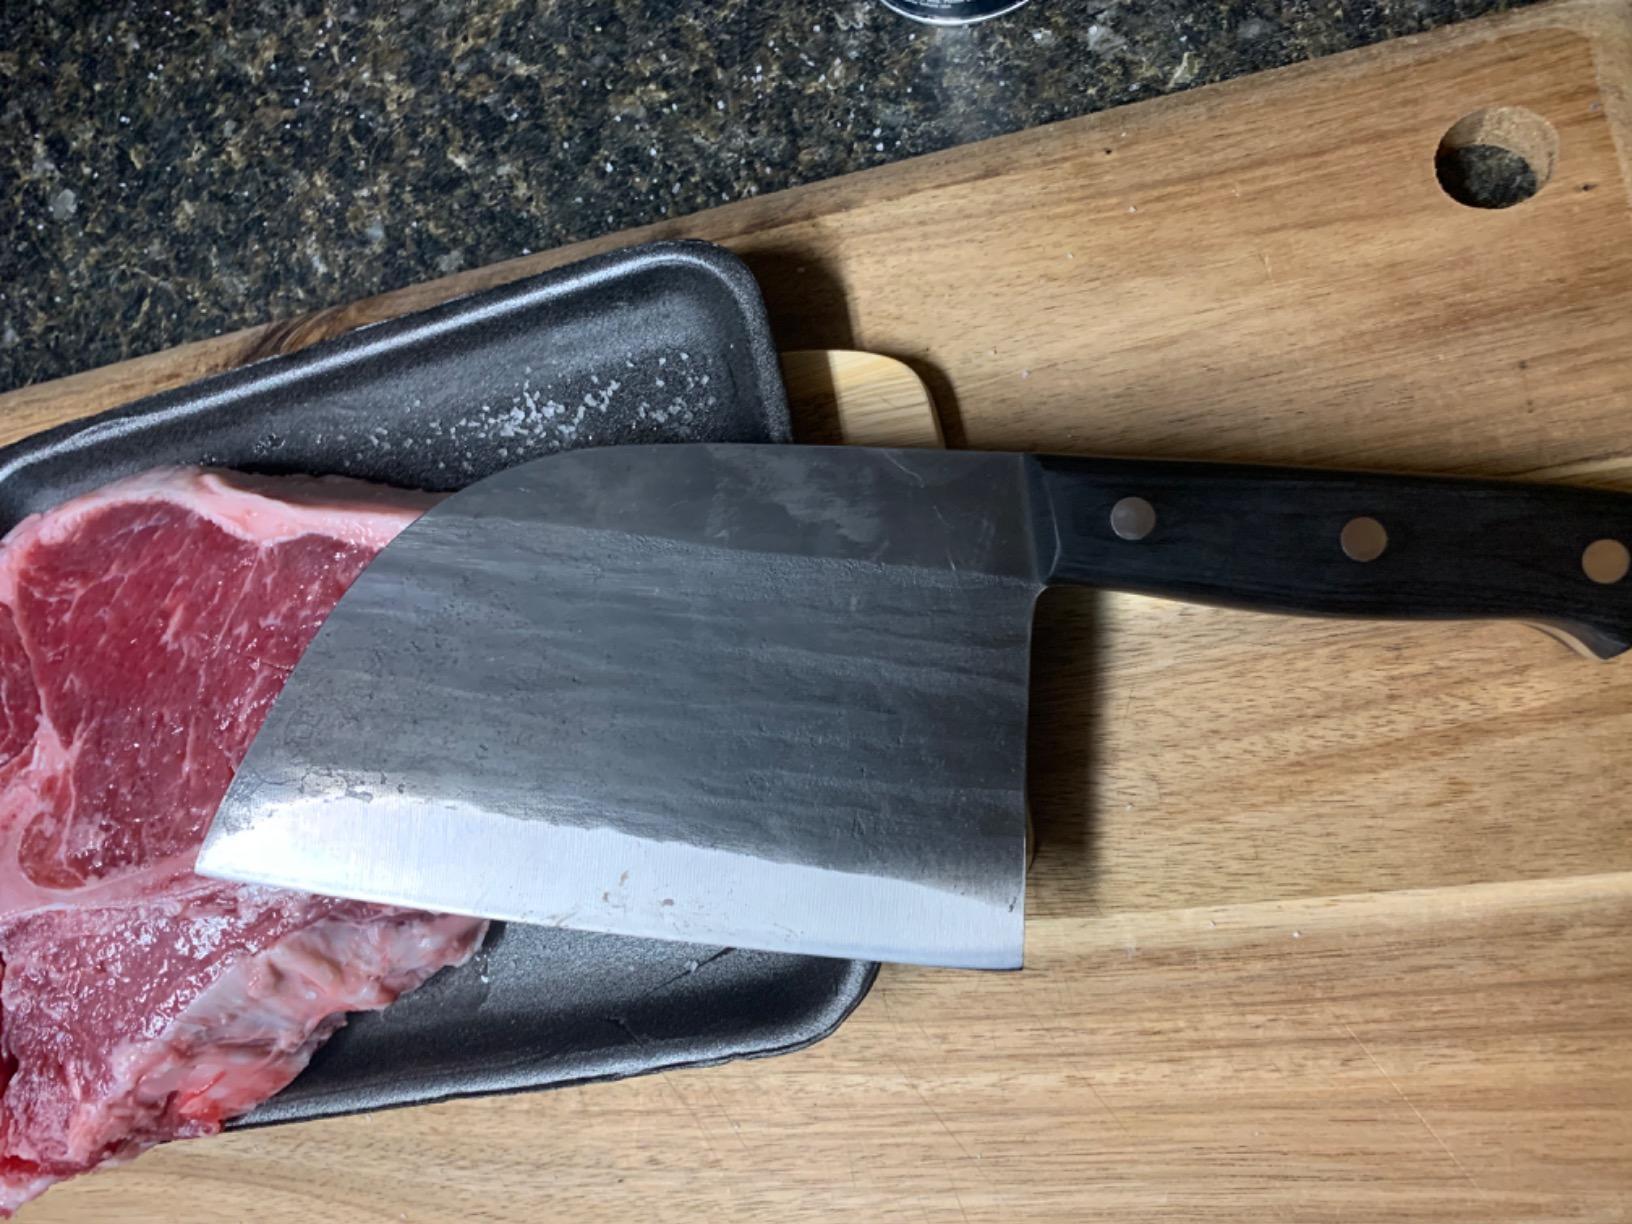 Professional Japanese Chef's Butcher Knife - High Carbon Stainless Steel Meat Cleaver photo review